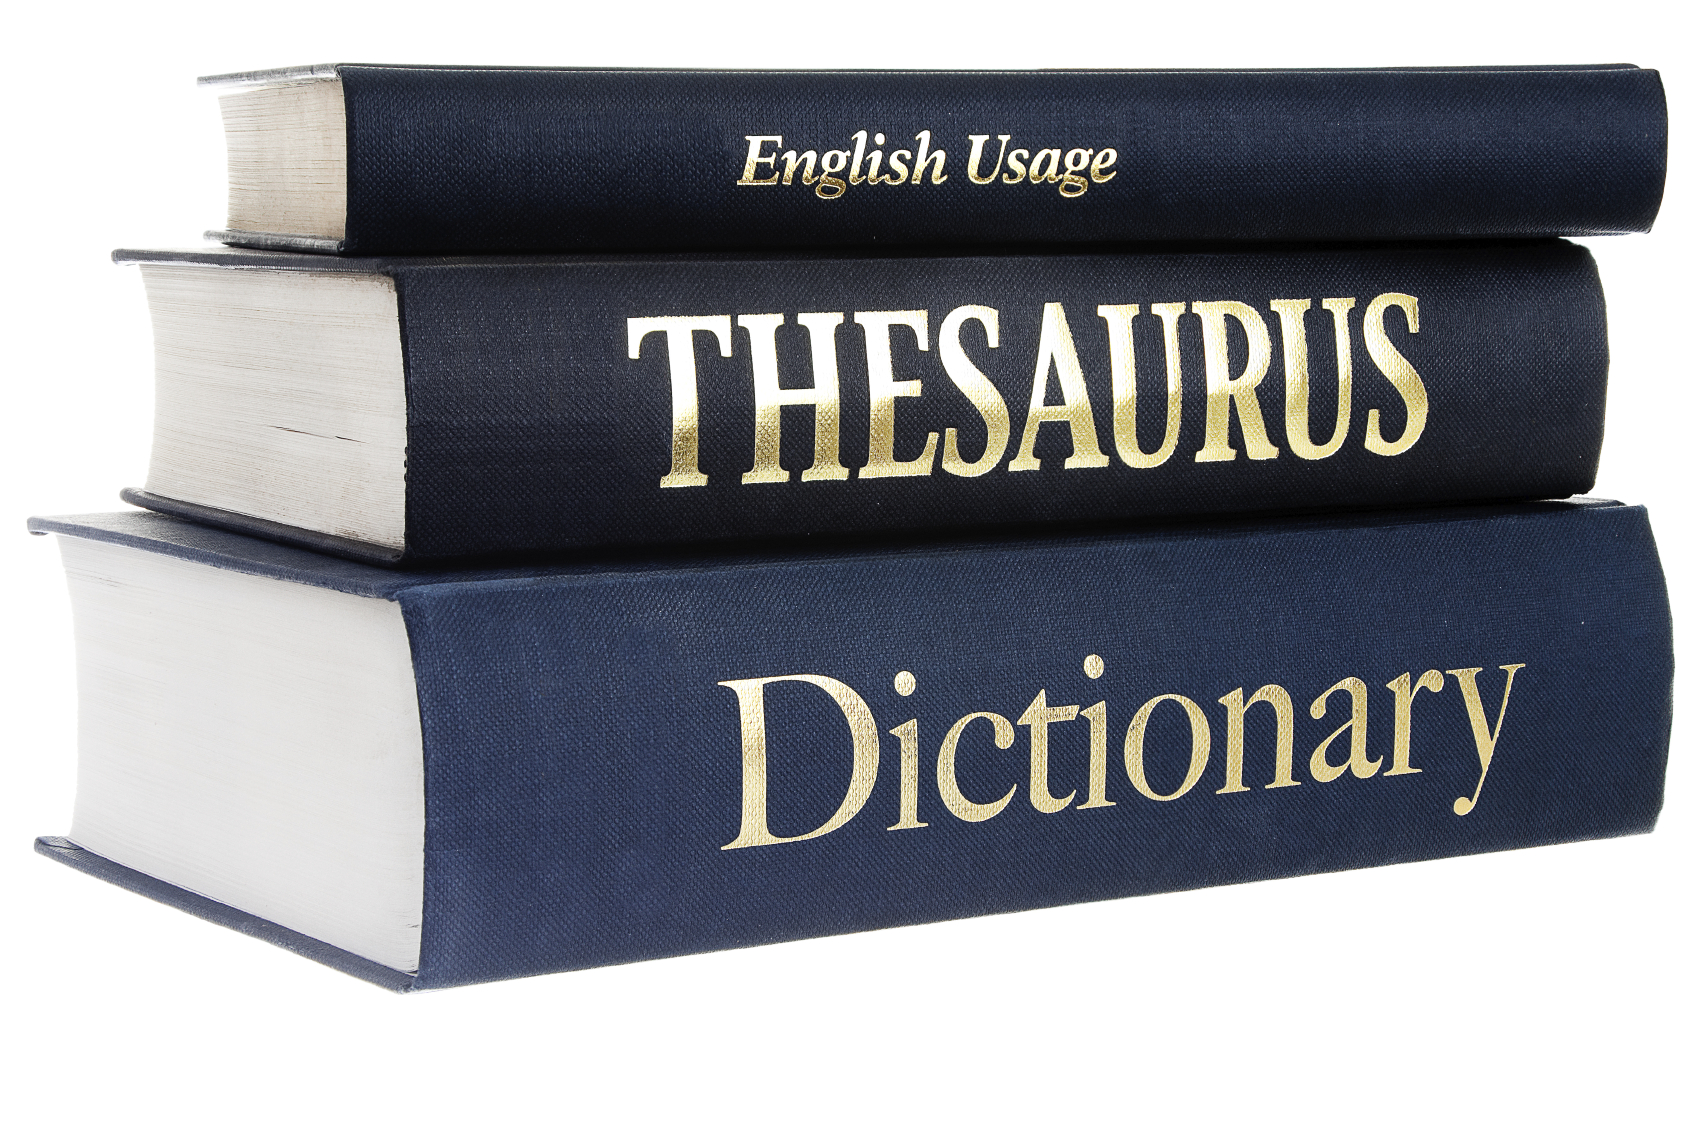 Confirm meaning of a word by using a dictionary or thesaurus